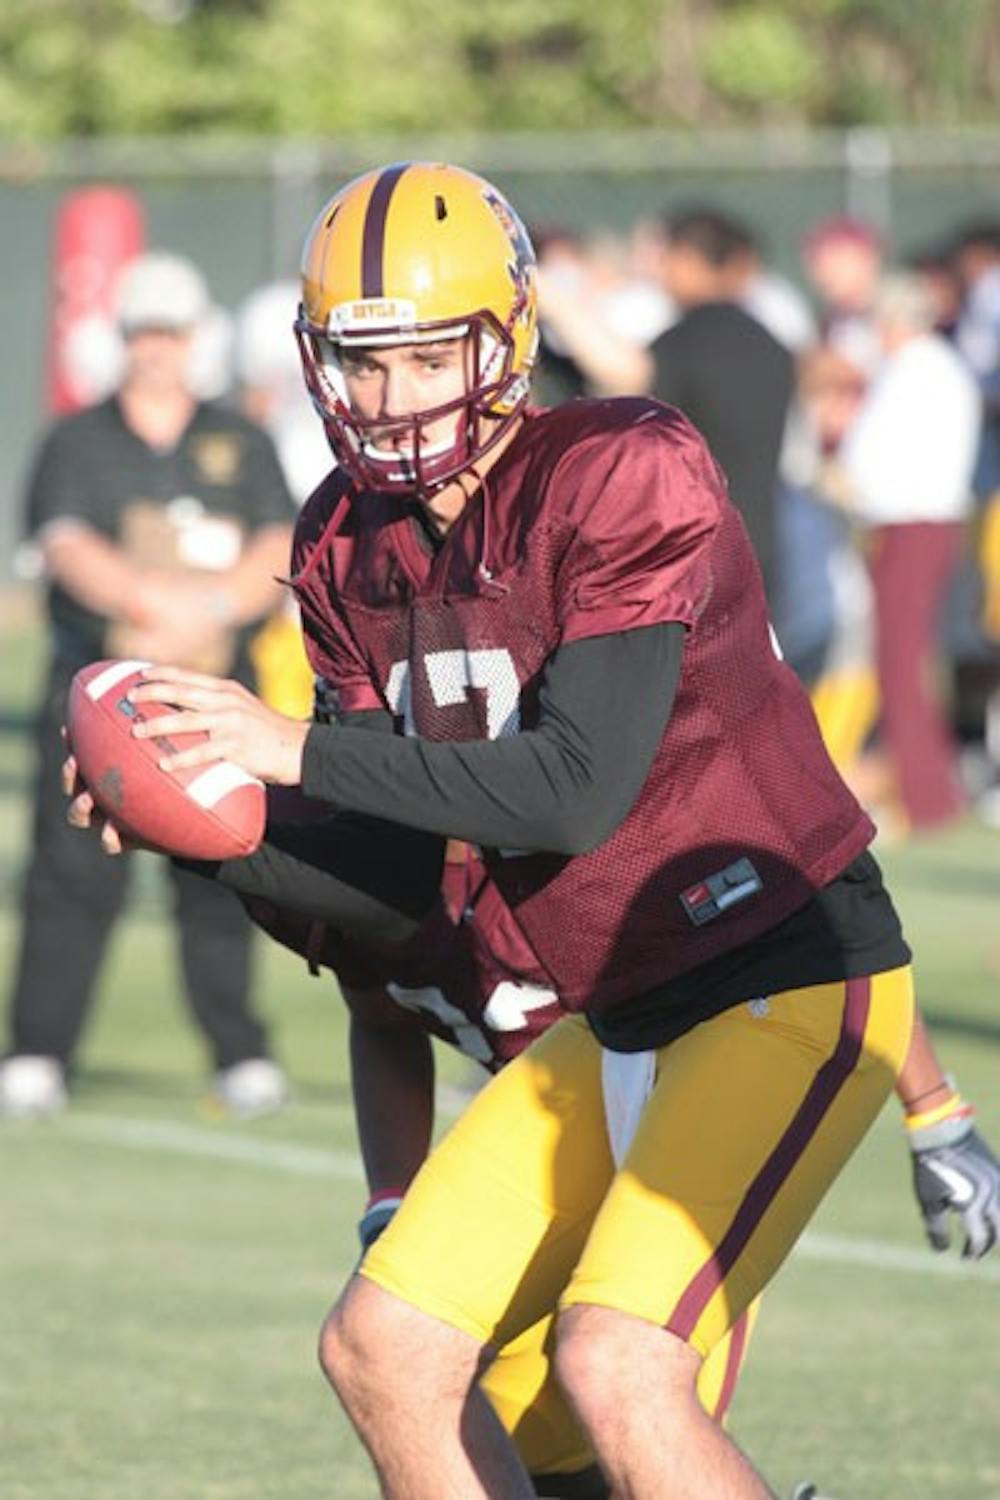 GETTING OFFENSIVE: ASU sophomore quarterback Brock Osweiler begins to drop back to pass during a spring practice last week. (Photo by Nick Kosmider)